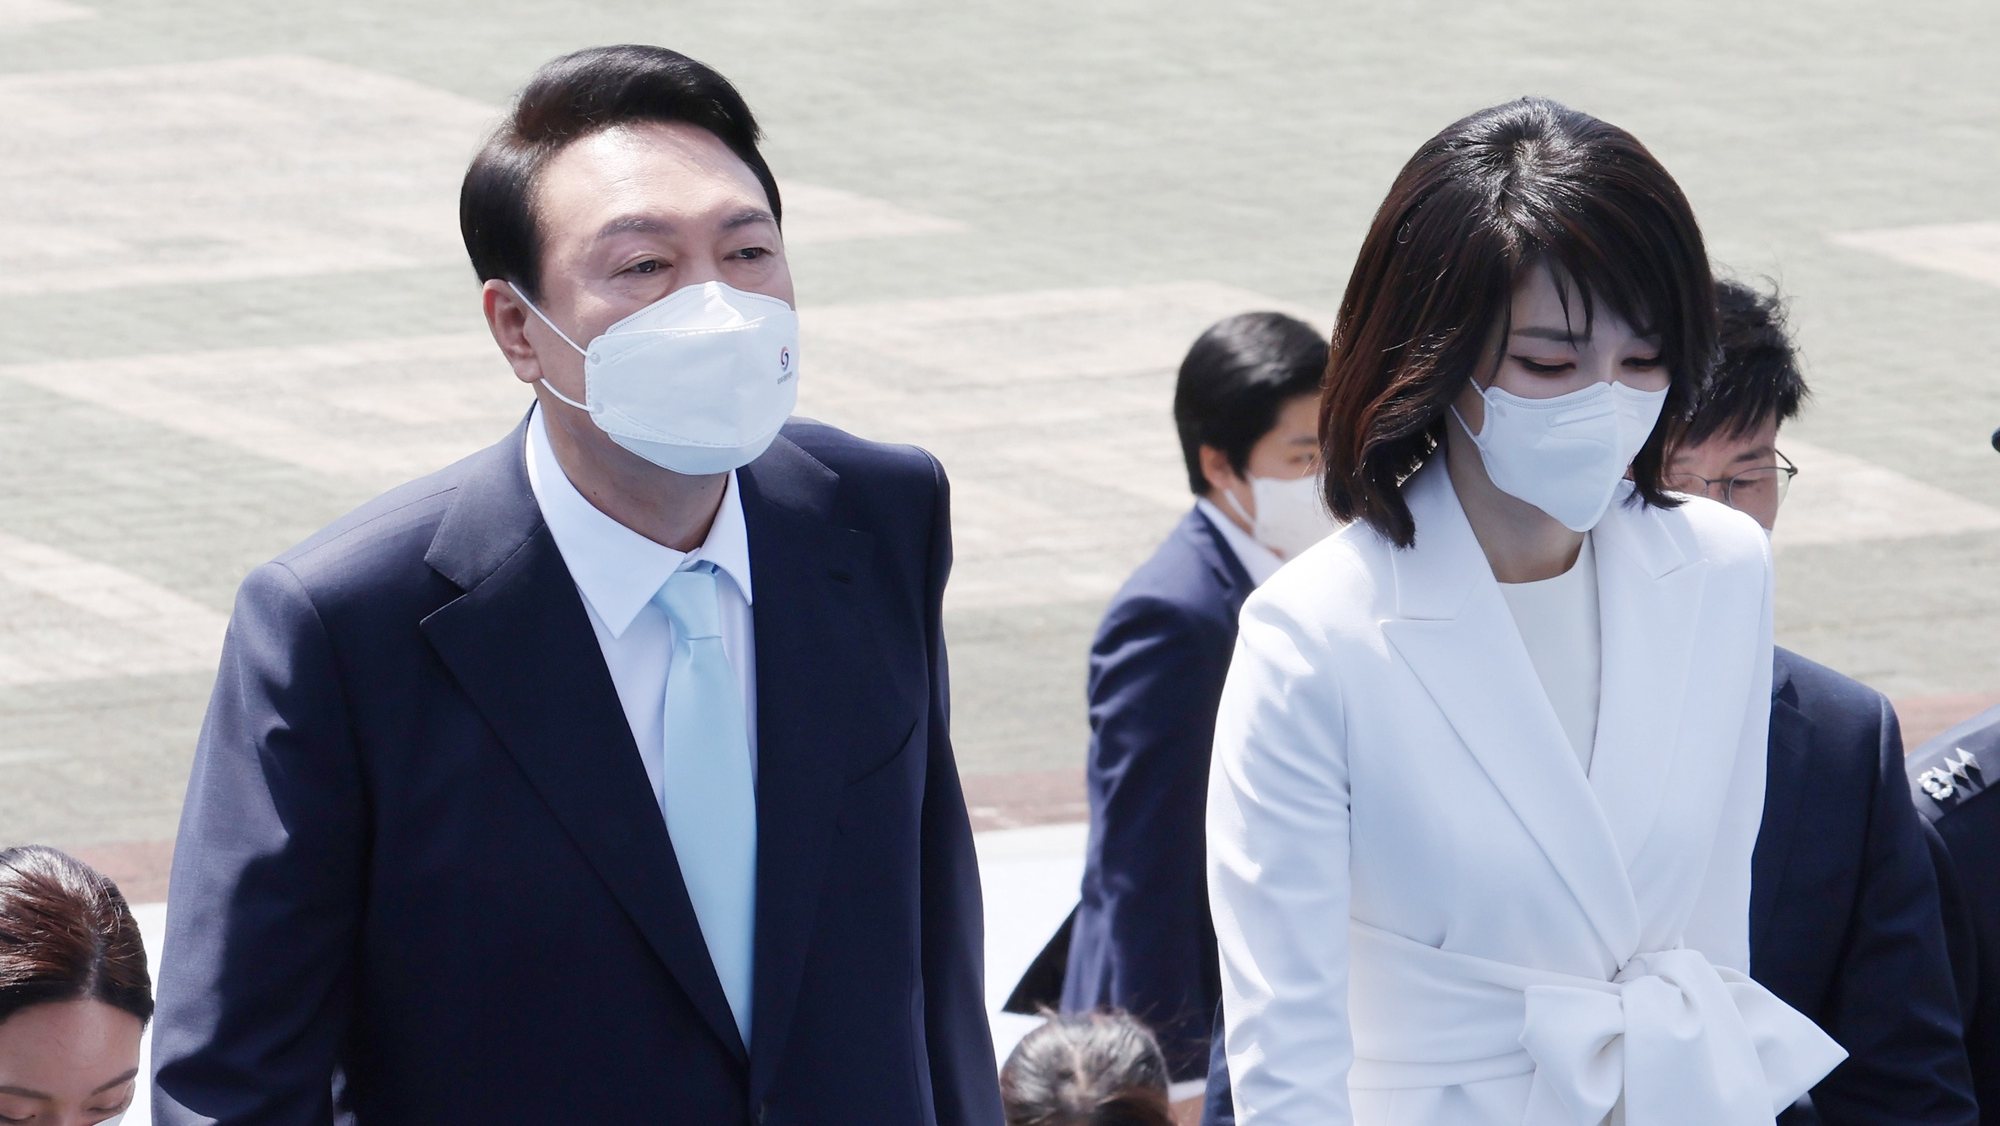 epa09937044 South Korean President Yoon Suk-yeol (L), alongside his wife Kim Keon-hee, arrives at his inauguration ceremony in front of the National Assembly in Seoul, South Korea, 10 May 2022.  EPA/YONHAP SOUTH KOREA OUT